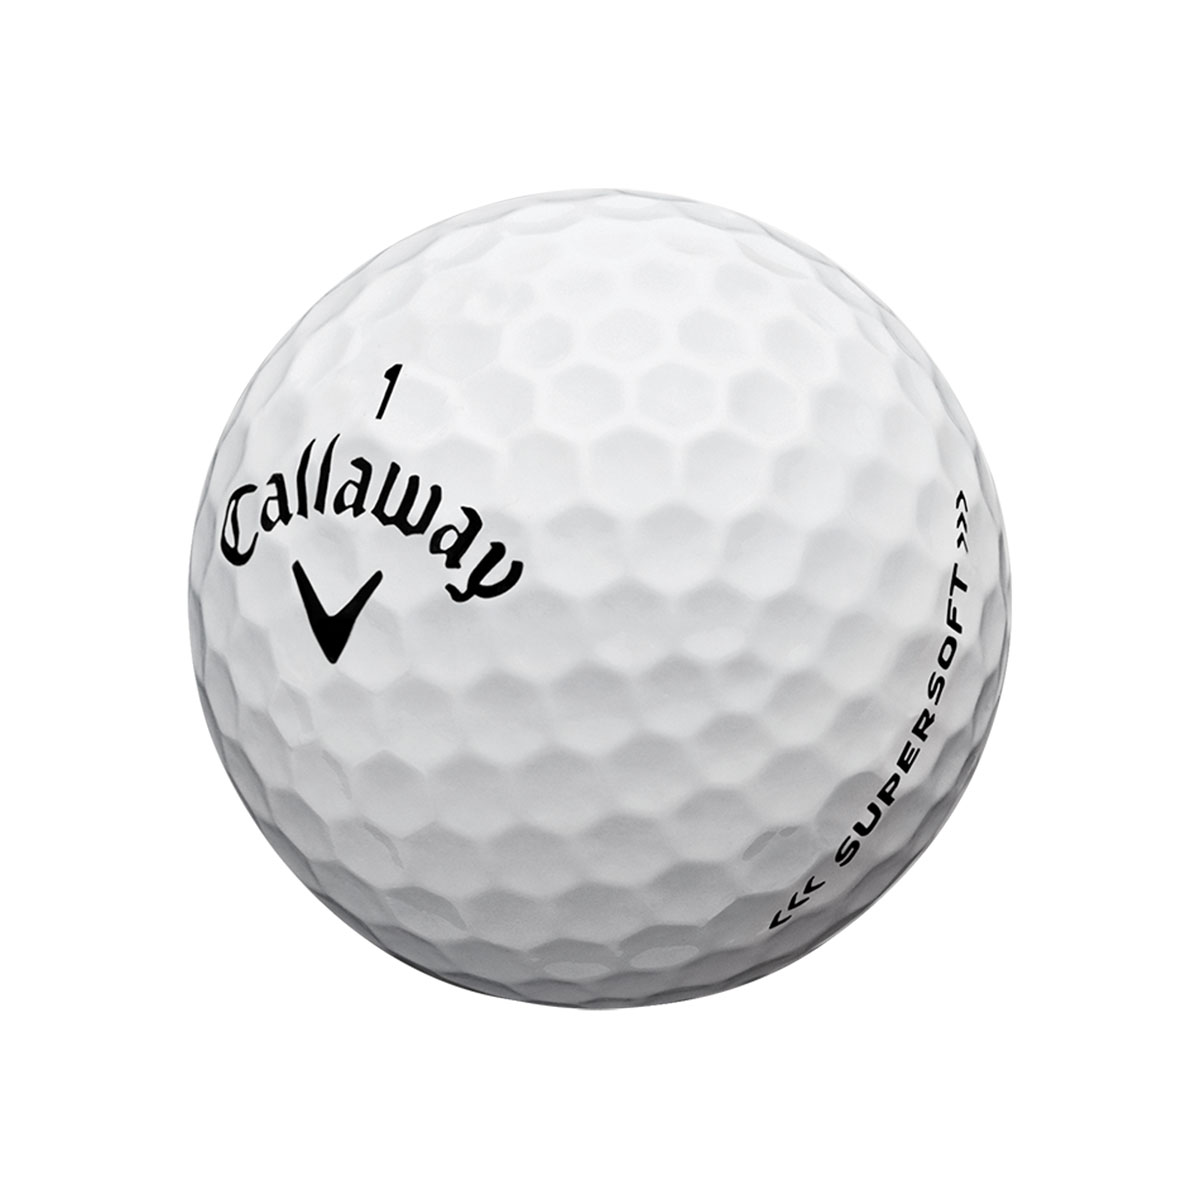 Callaway Golf Supersoft 12 Ball Pack 2017 from american golf